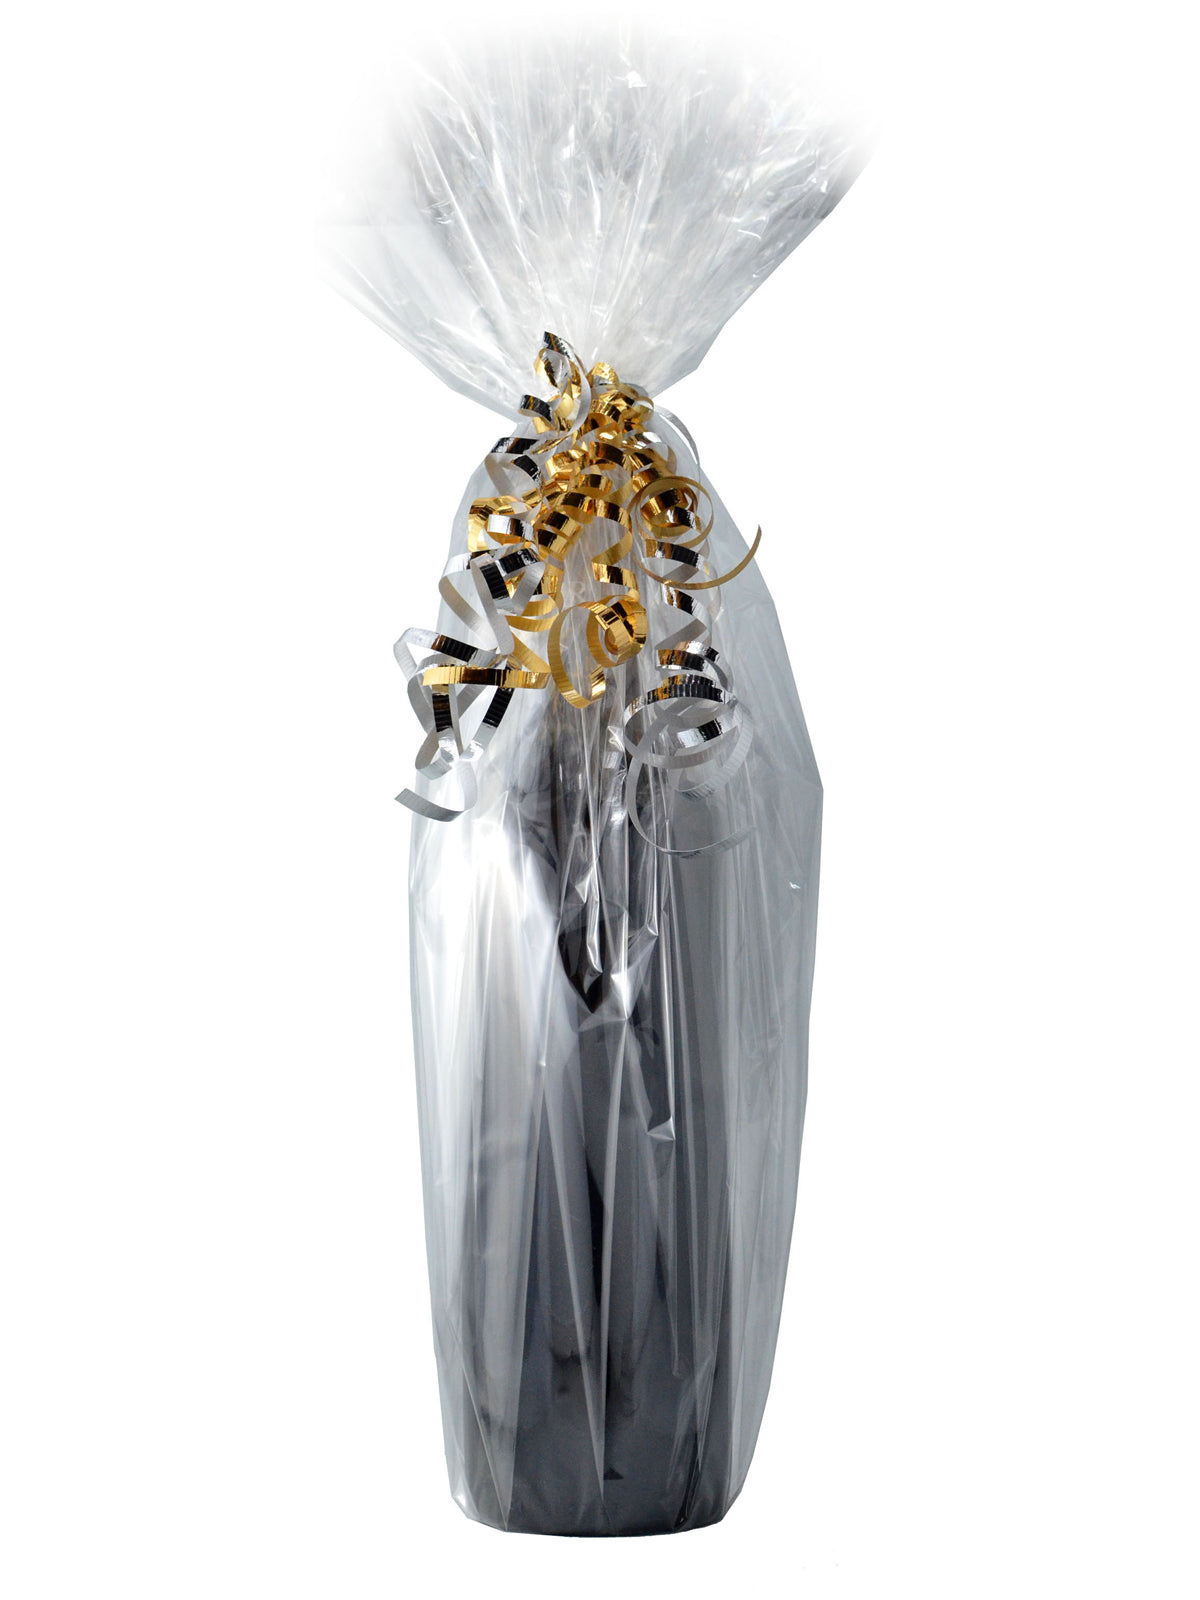 Cellophane Gift Wrapping - empty: add the bottle(s)!